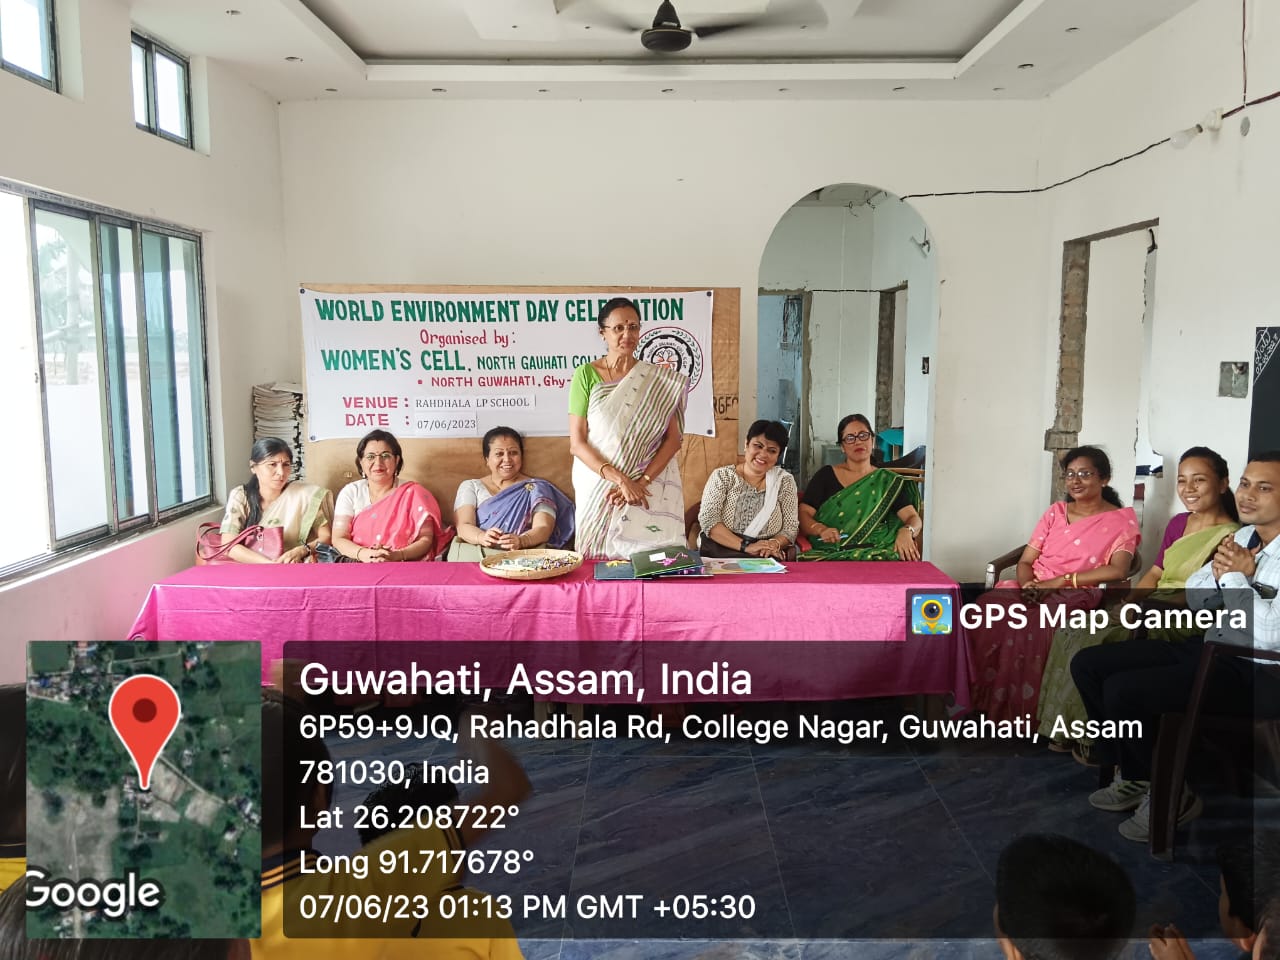 World Environment Day celebration by Women's Cell, NGC on 07.06.2023